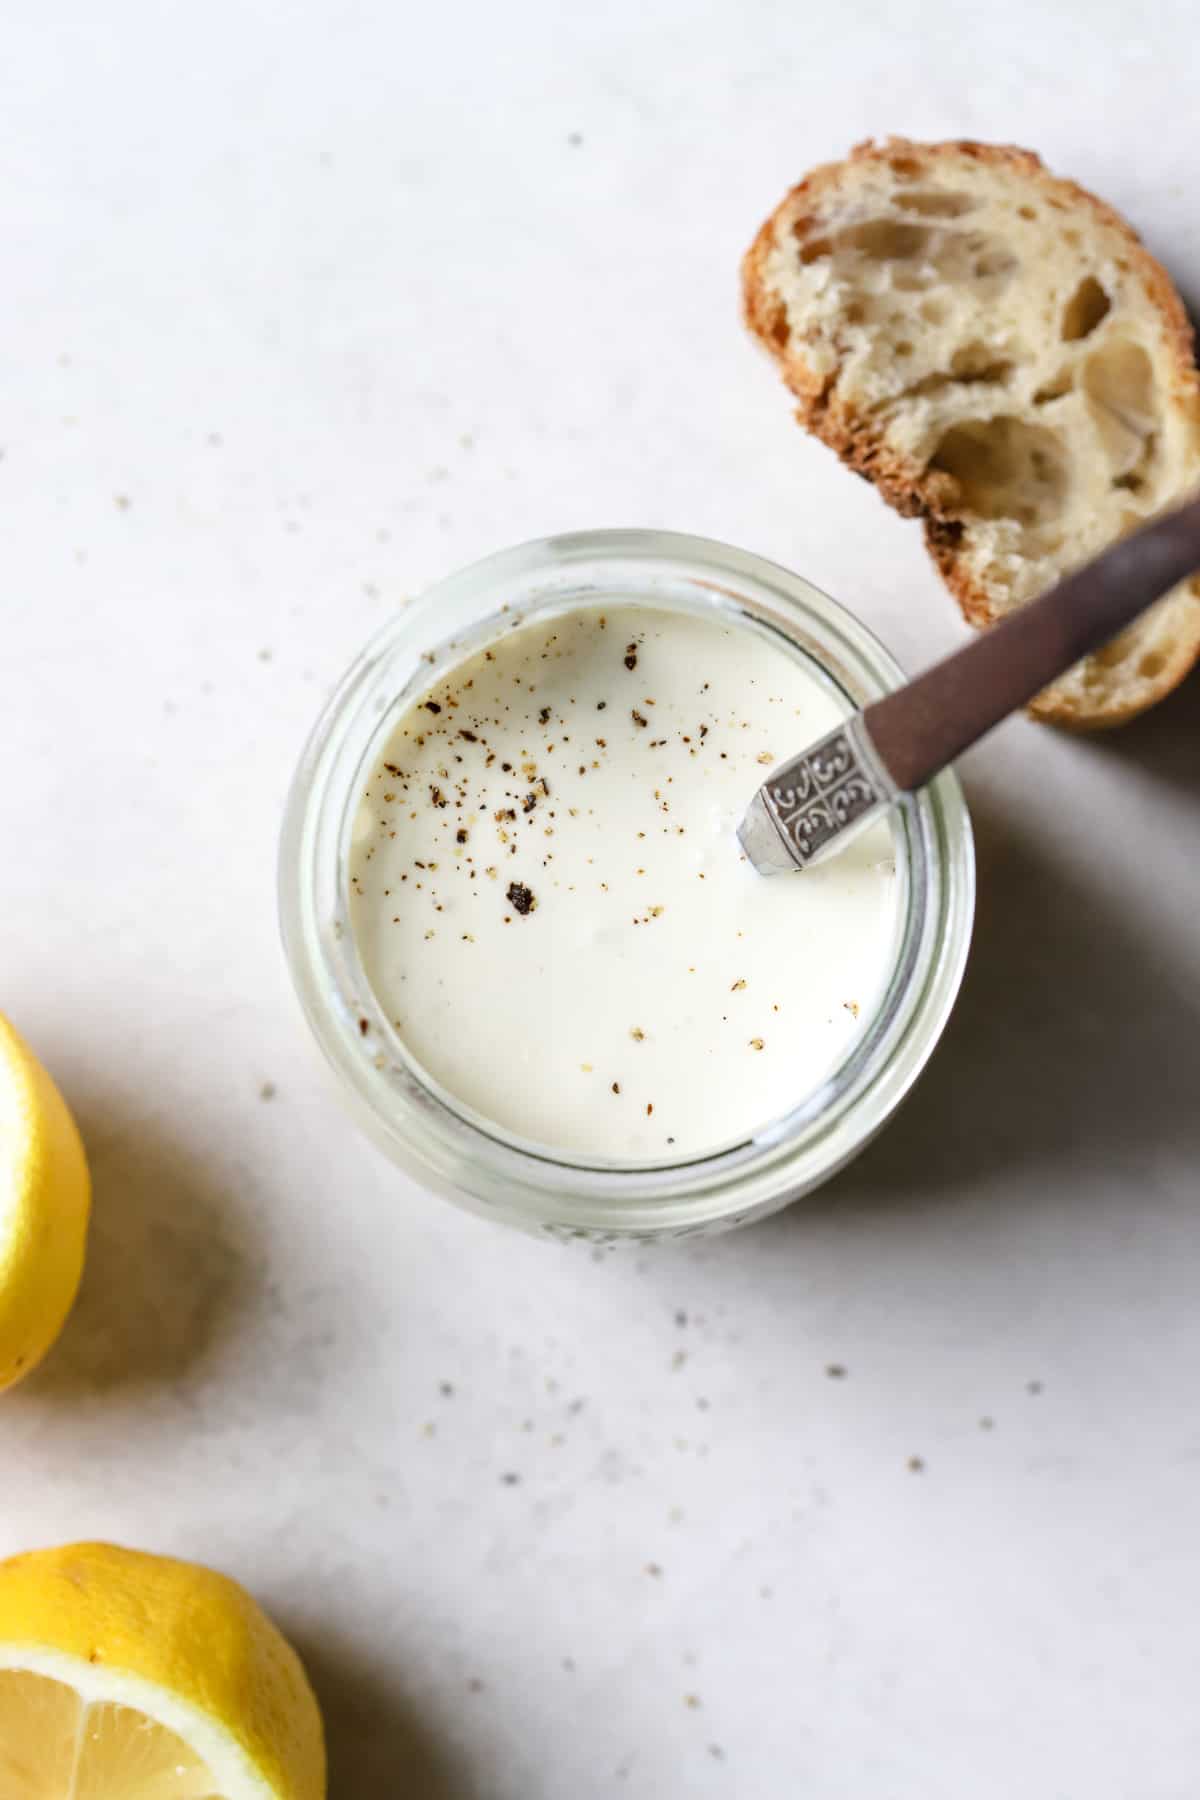 Homemade Caesar dressing is in a small jar with freshly cracked pepper on top and spoon resting in the jar on a light gray surface. Next to the dressing are a couple lemon slices and a slice of fresh sourdough bread.